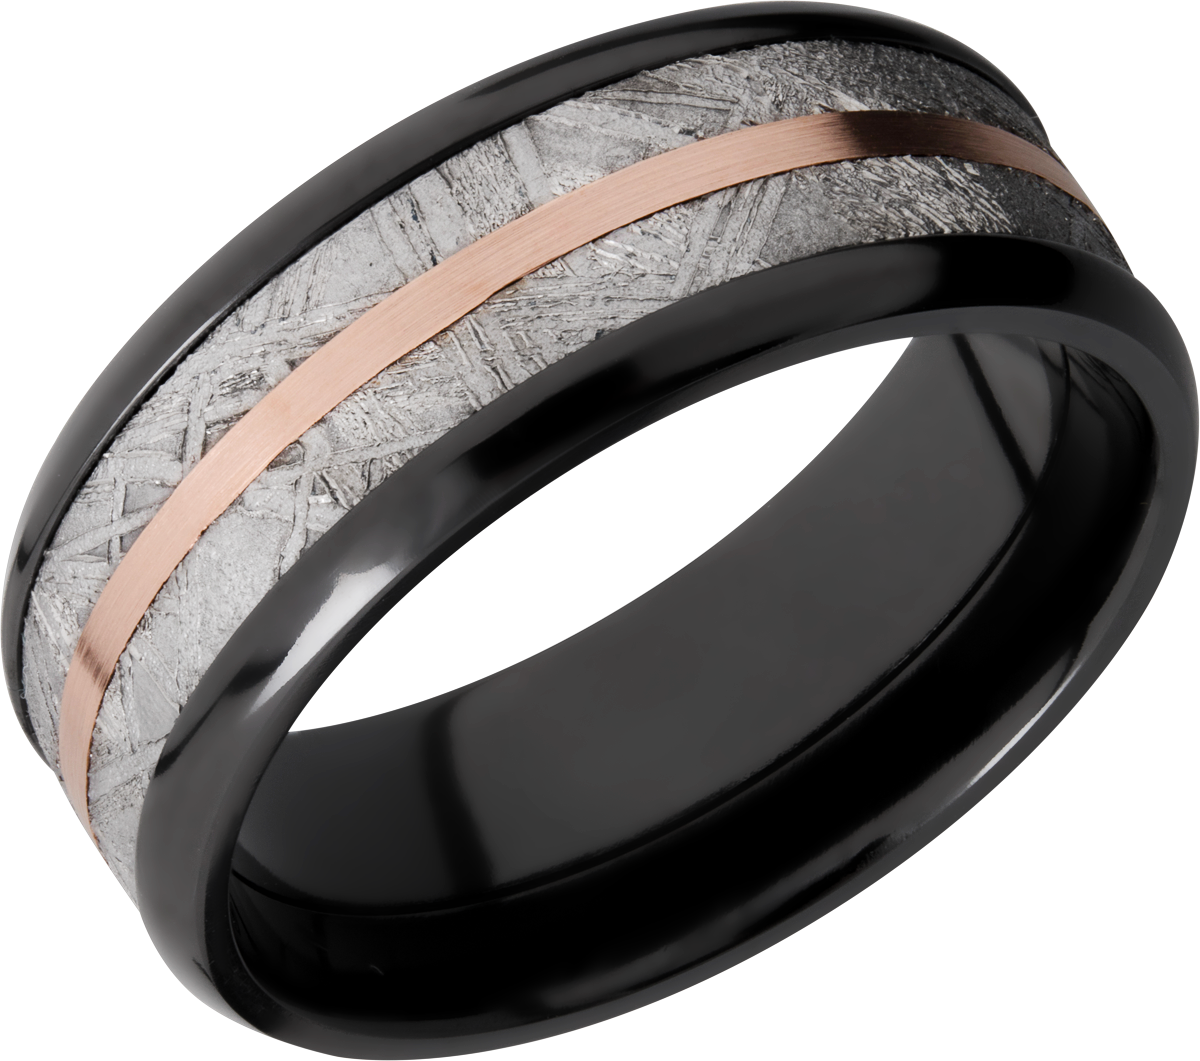 Black zirconium 8mm beveled edge and with one inlay that is 5mm wide of a mosaic pattern. (NS)=No S